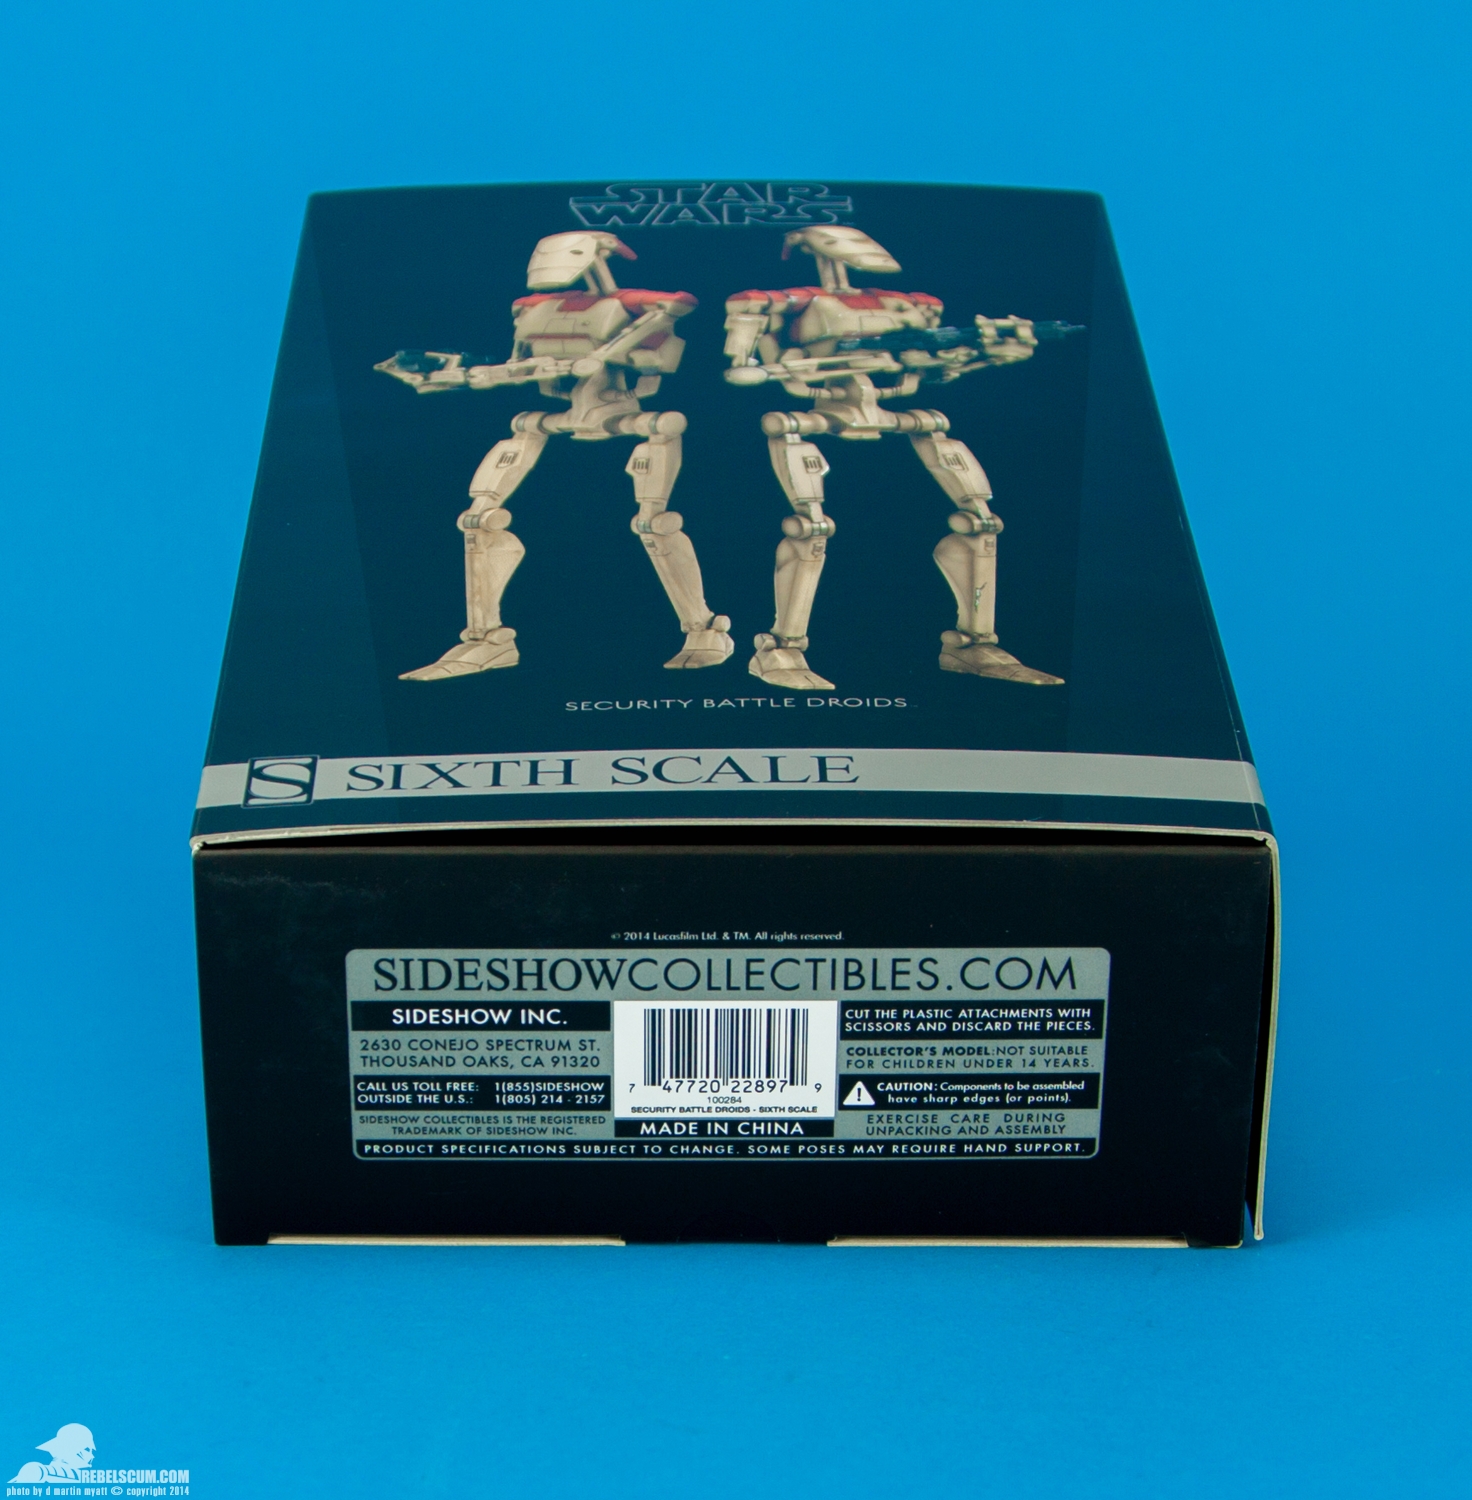 Security-Droids-Sixth-Scale-Sideshow-Collectibles-022.jpg